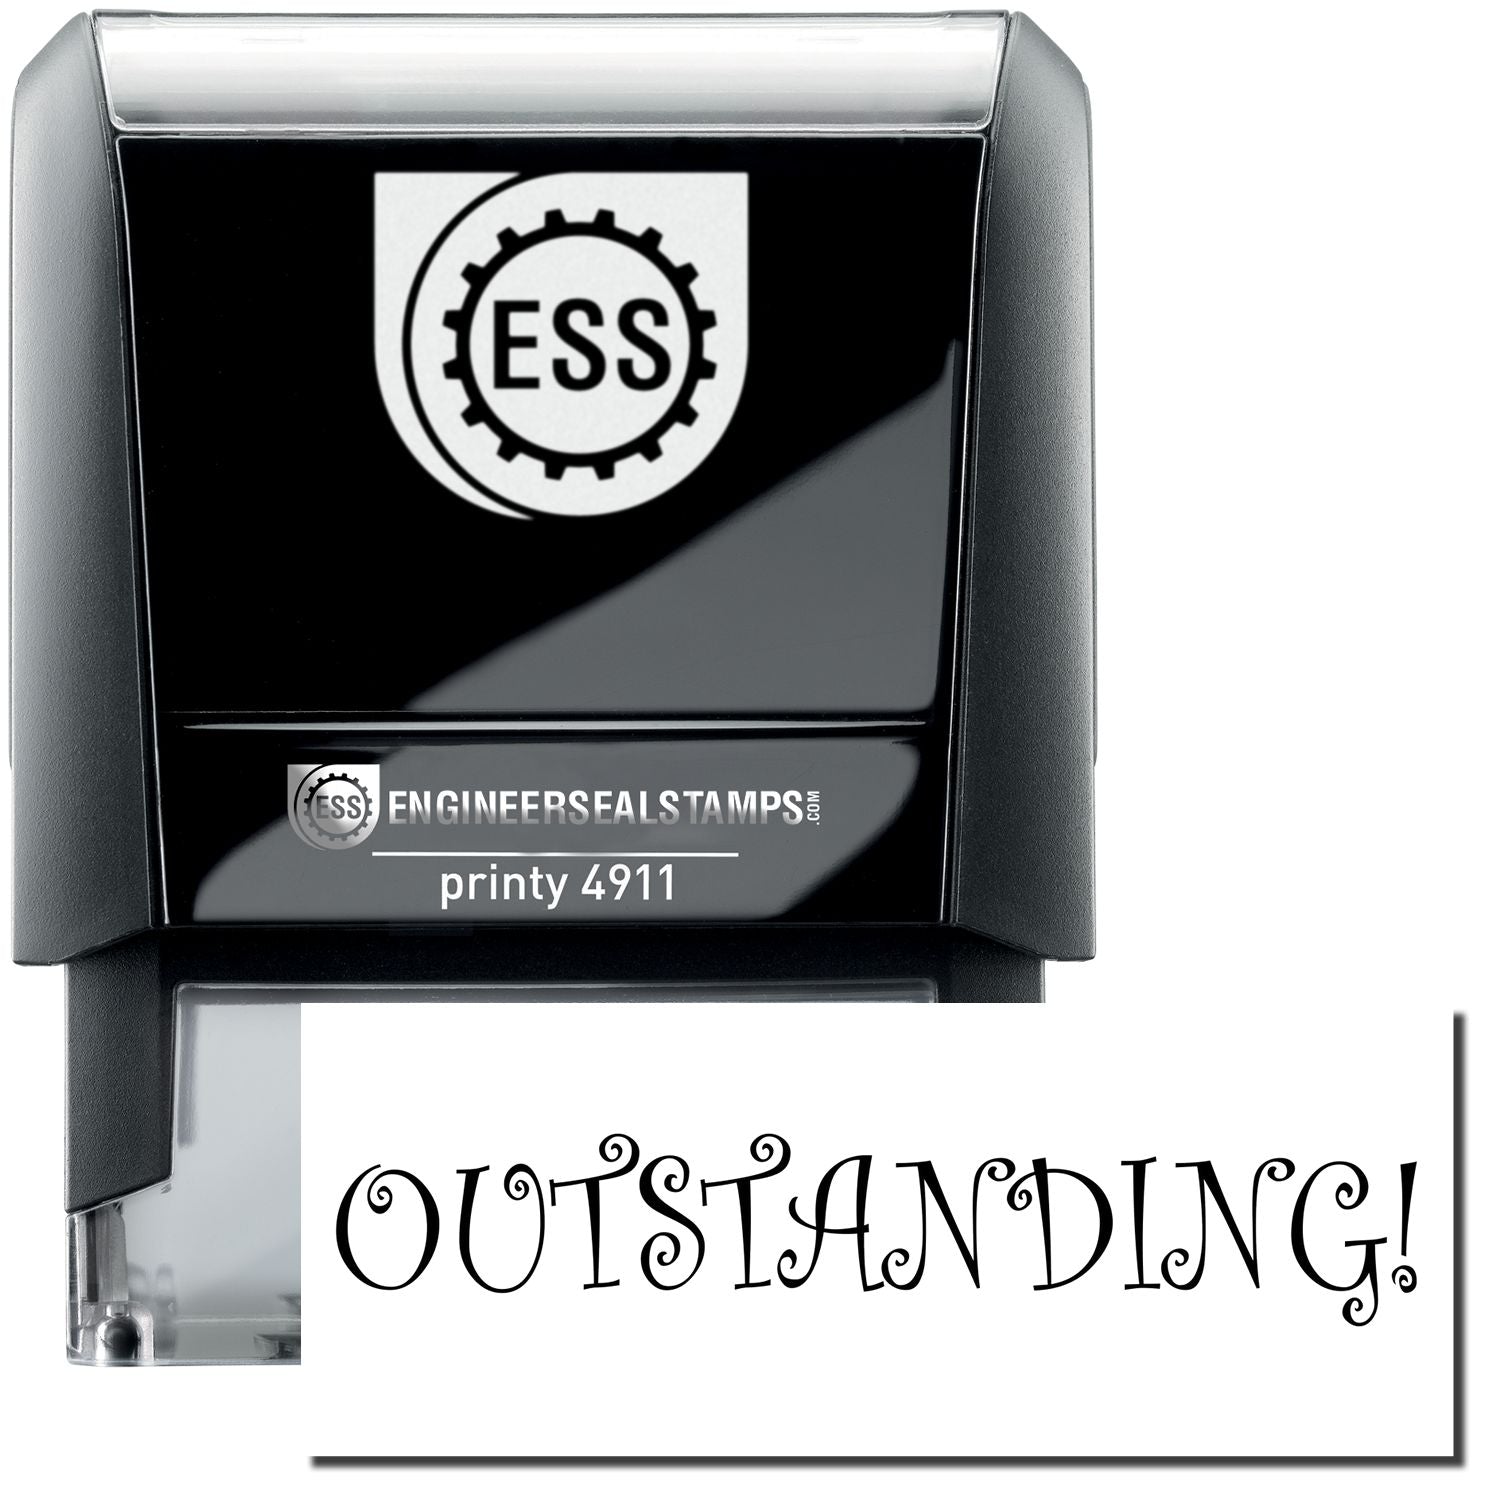 A self-inking stamp with a stamped image showing how the text "OUTSTANDING!" is displayed after stamping.